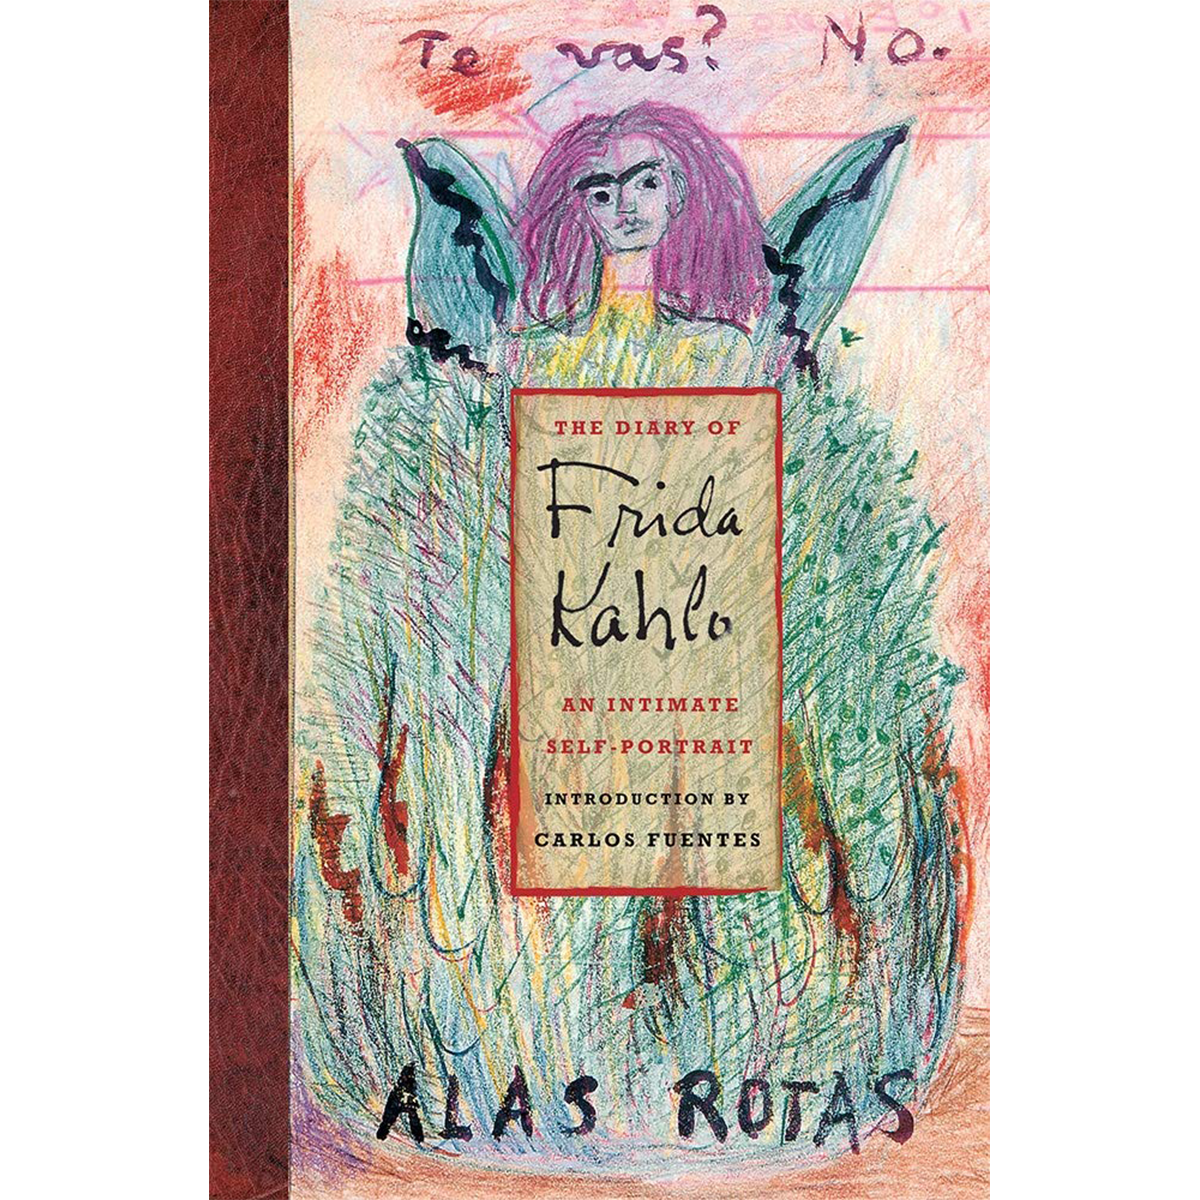 The Diary of Frida Kahlo: An Intimate Self Portrait